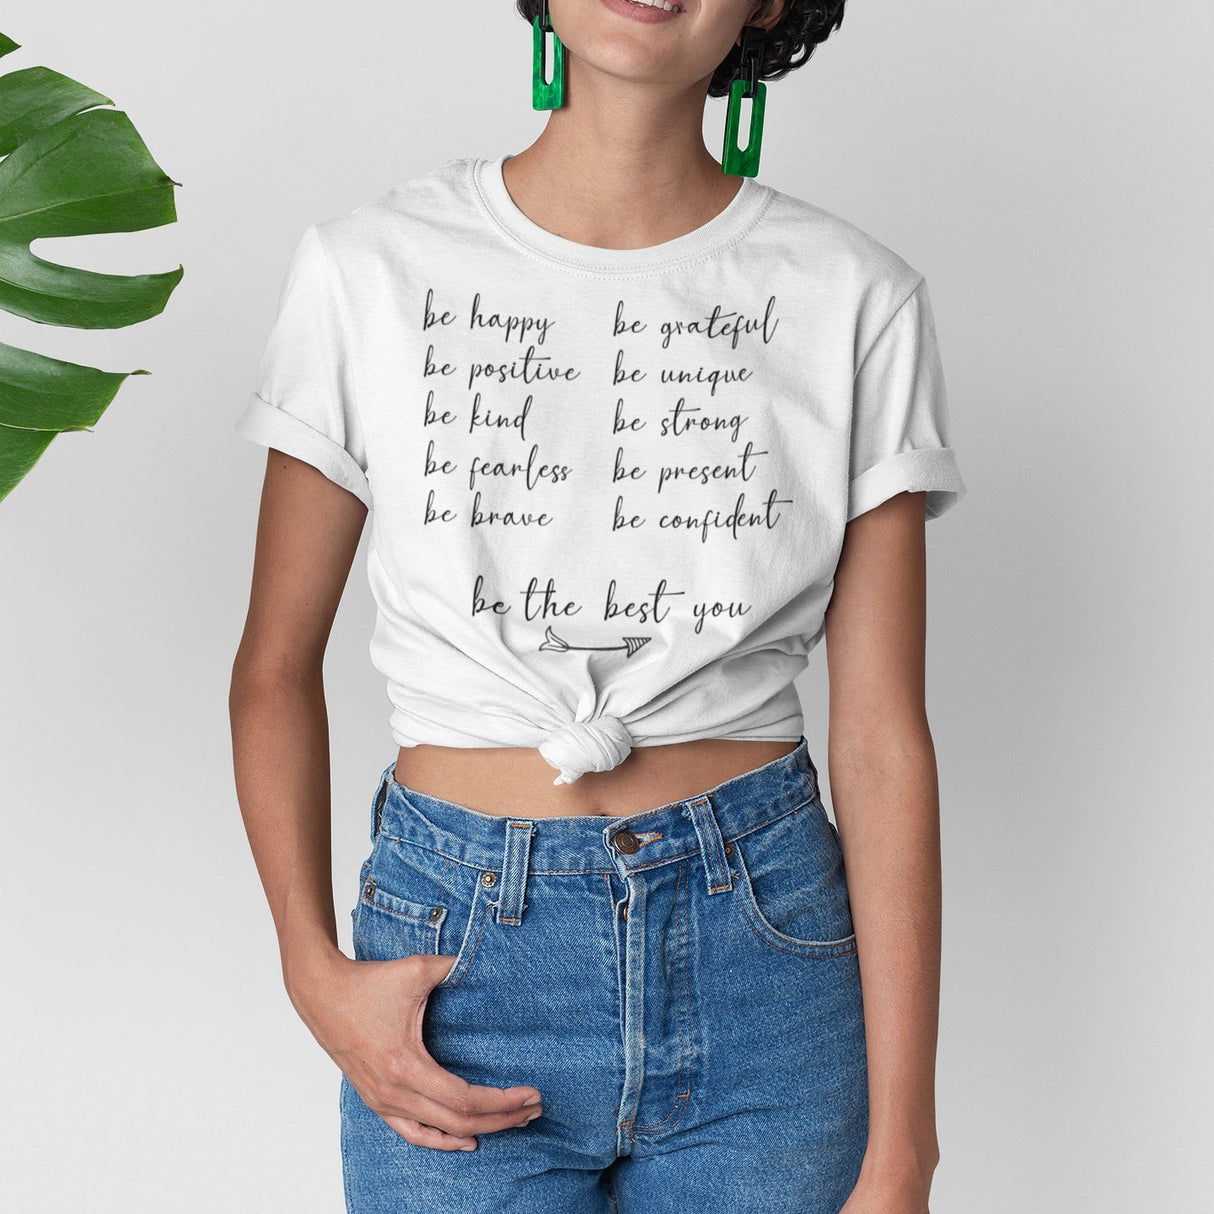 be-happy-be-positive-be-kind-be-fearless-be-brave-be-grateful-be-unique-be-strong-be-present-be-confident-happy-tee-positive-t-shirt-fearless-tee-t-shirt-tee#color_white